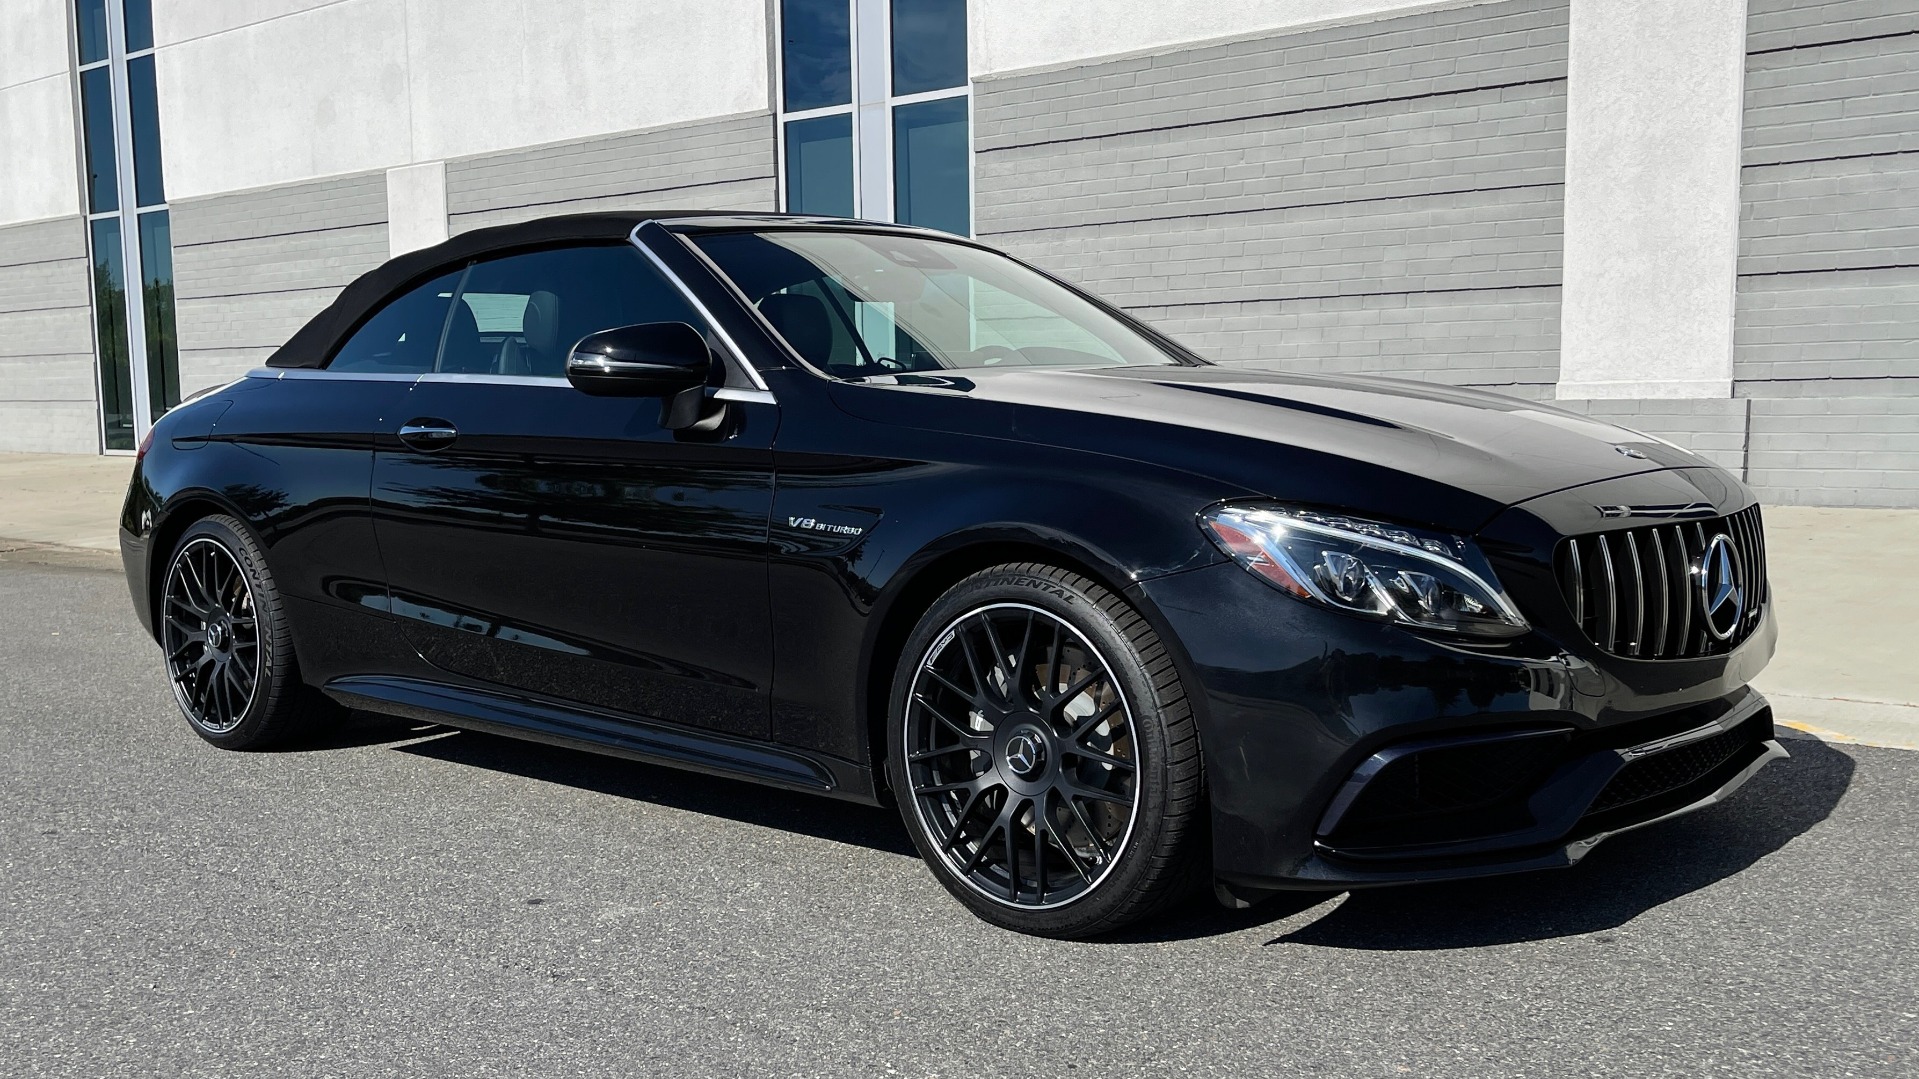 Used 2018 Mercedes-Benz C-CLASS AMG C 63 CAB / PREMIUM / LIGHTING / NIGHT PKG / PERF EXHAUST for sale $67,495 at Formula Imports in Charlotte NC 28227 8